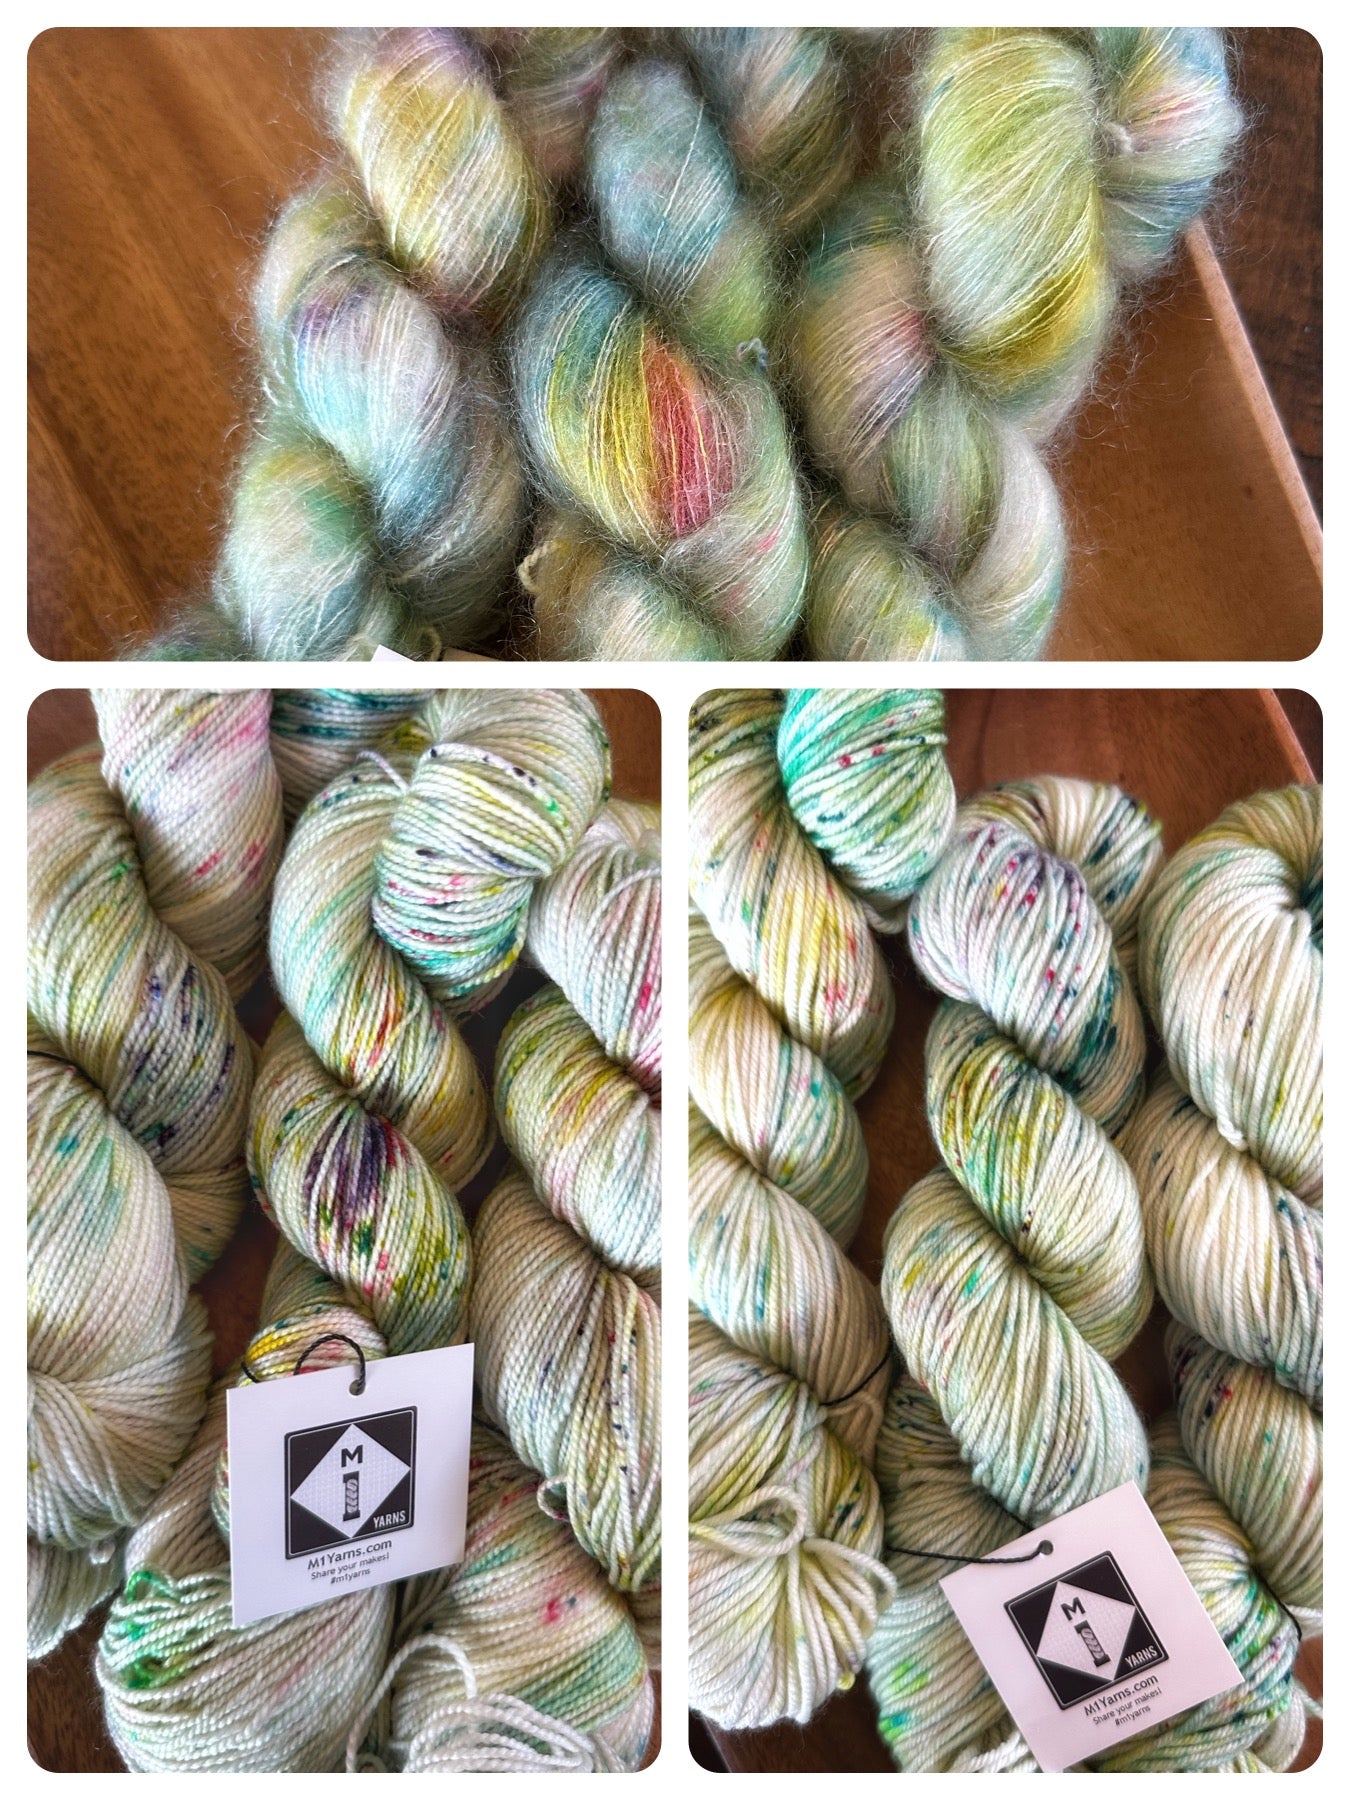 It's My Party - our newest colorway!